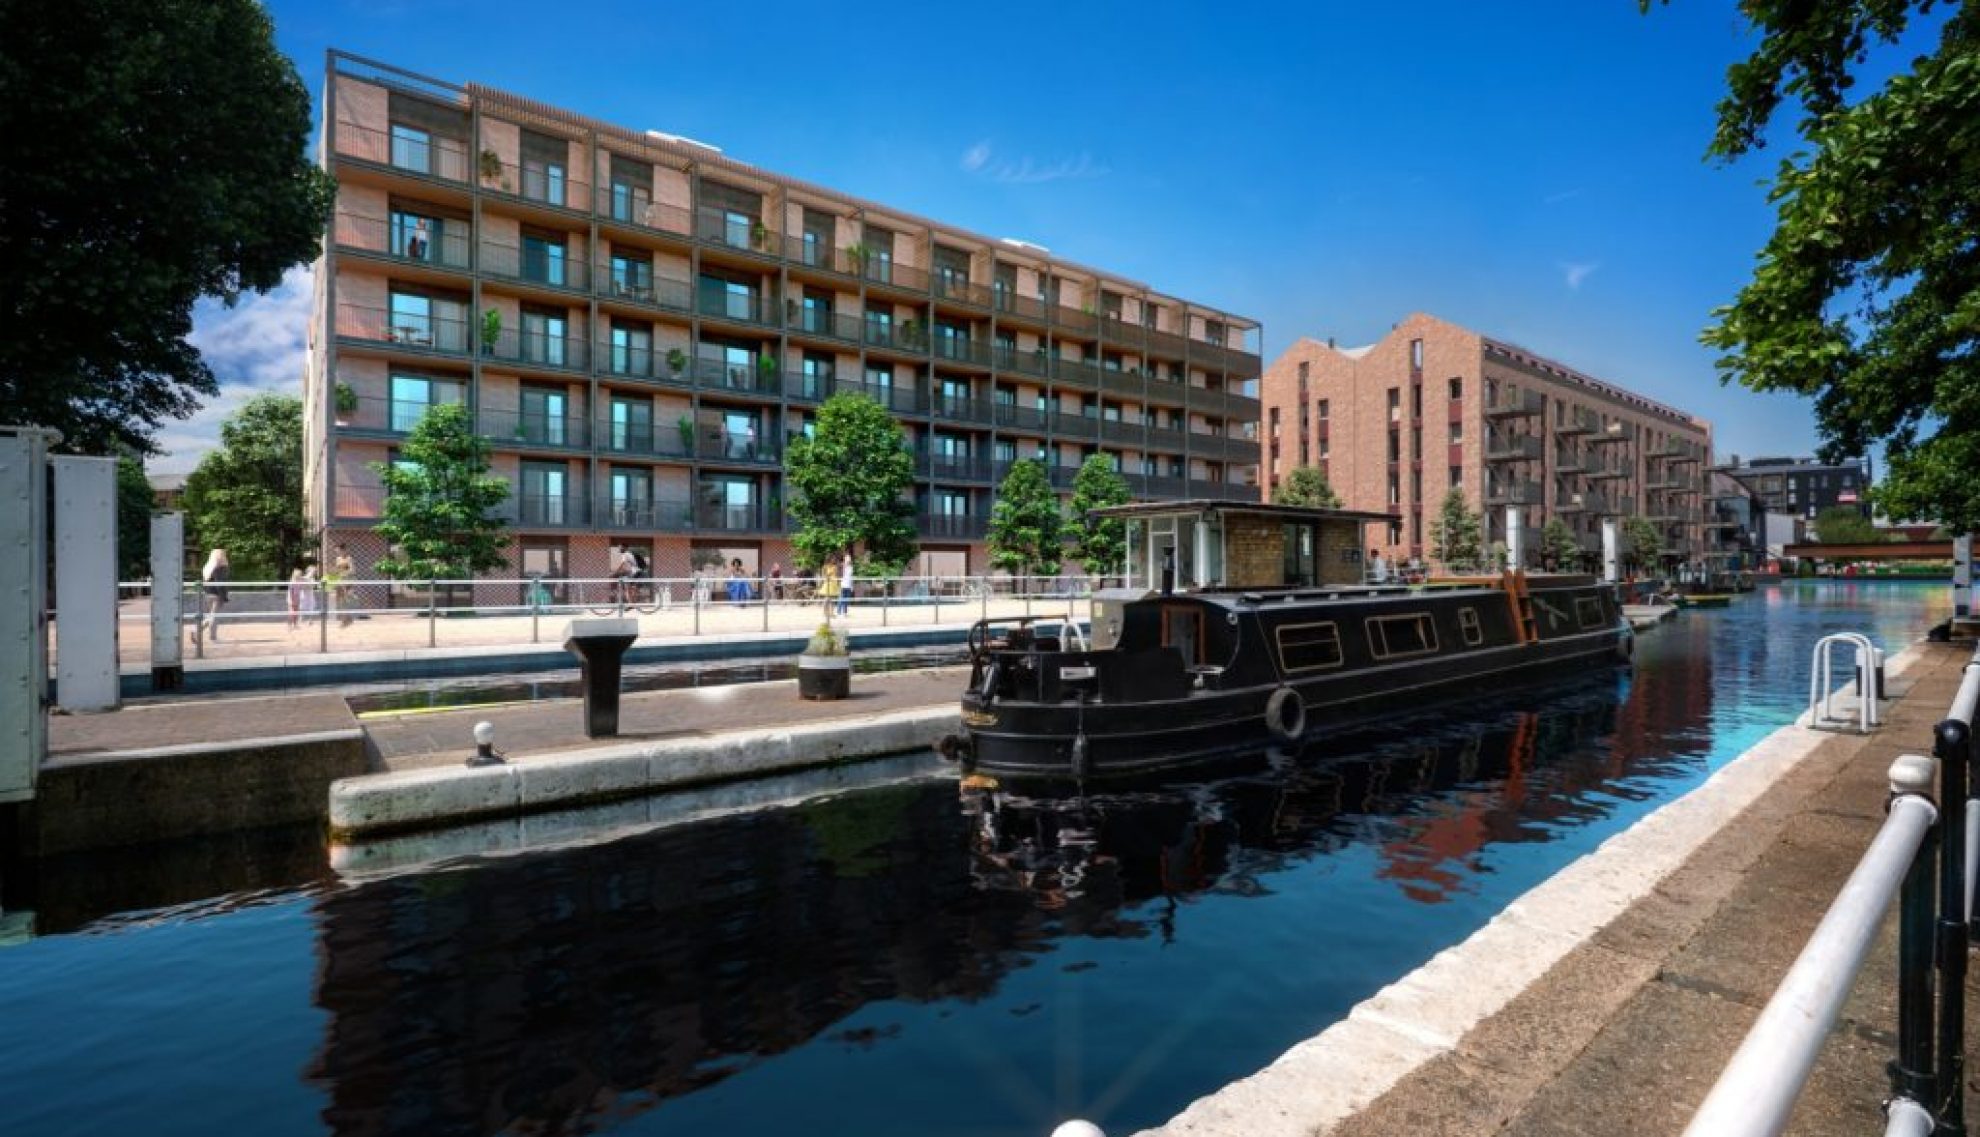 The Lock Number 19 development in the E3 London postcode